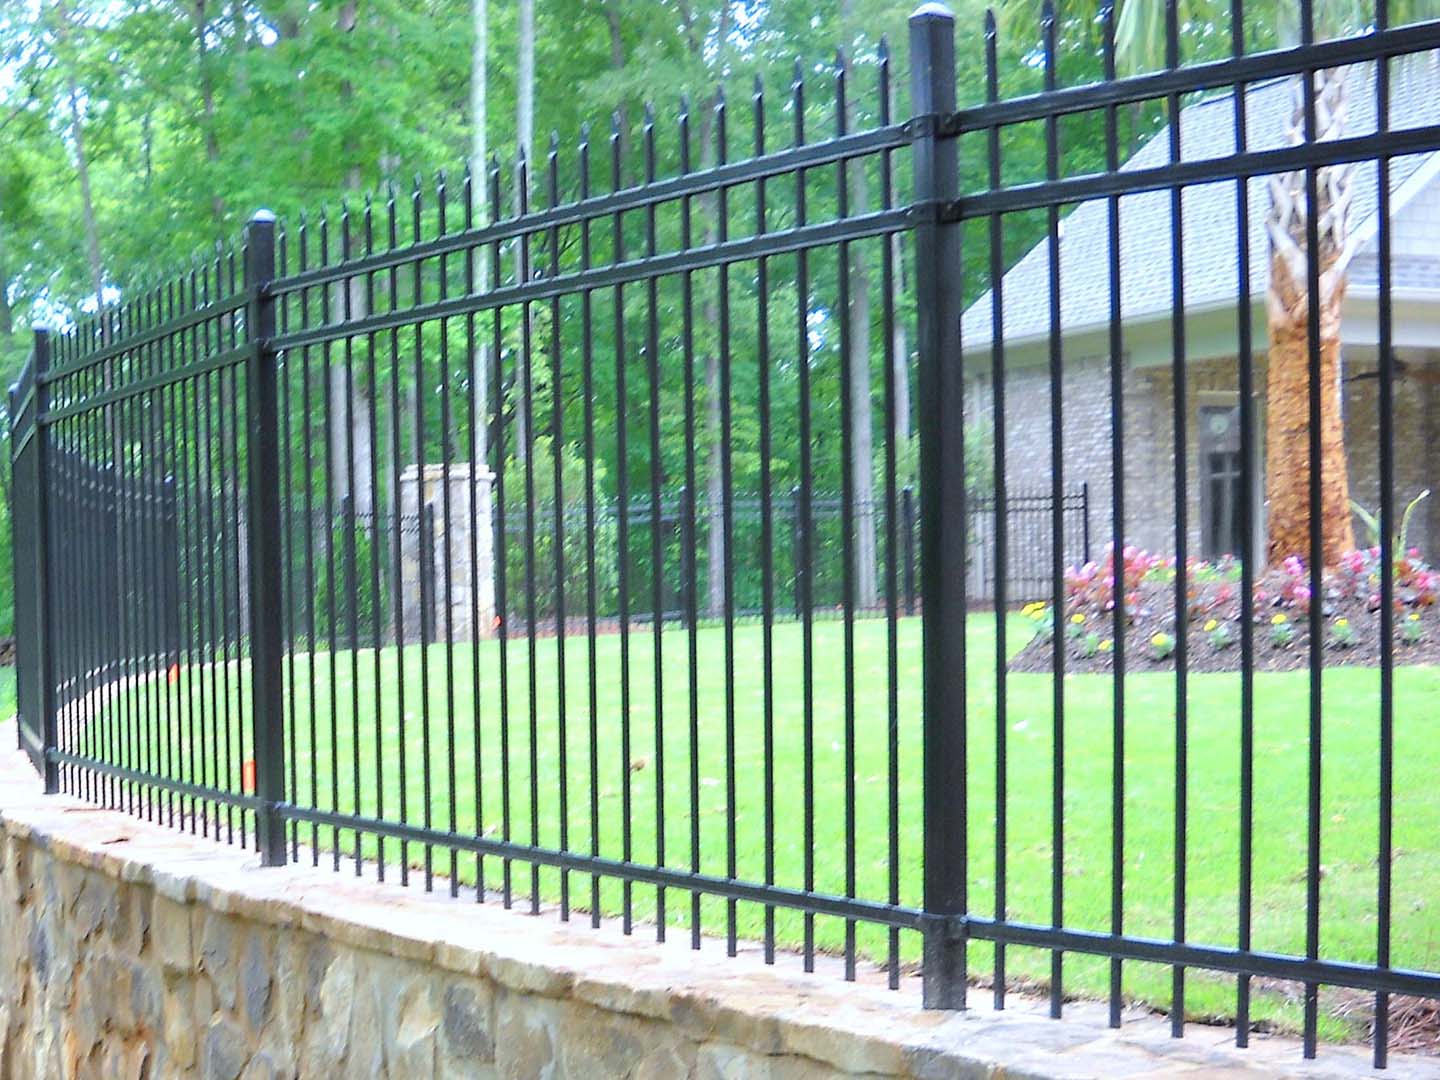 Acworth Georgia residential and commercial fencing